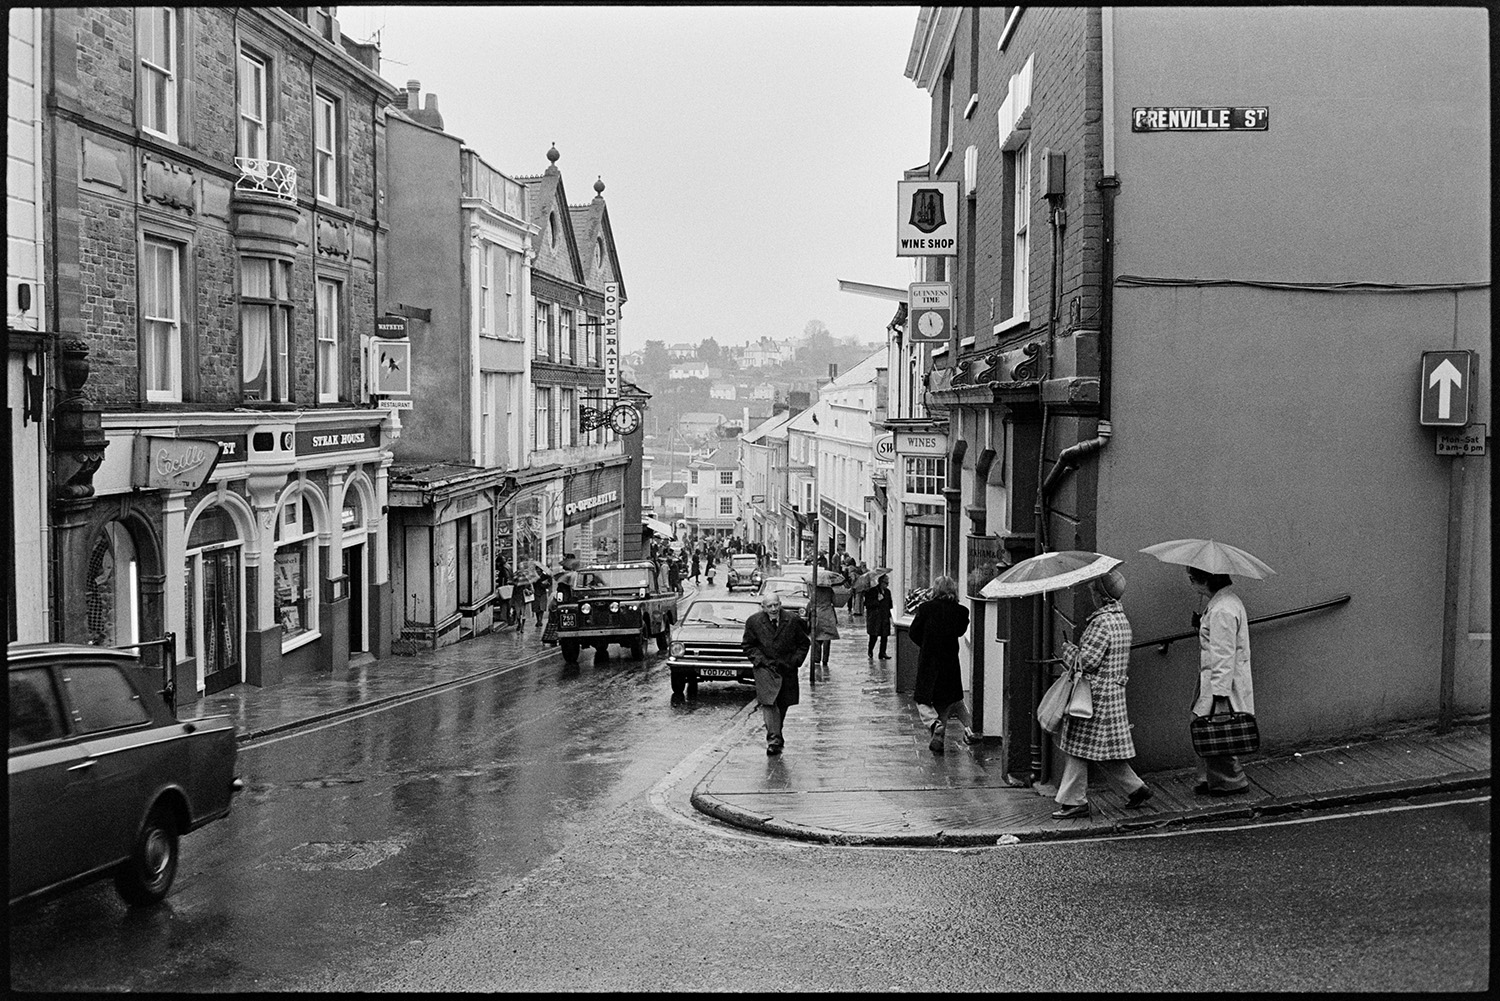 Sign outside Grocery stores in street with passers by. 
[Shoppers and passers by in Buttgarden Street, Bideford. Shop fronts, including the Co-Operative, Wine Shop and Steak House, and cars can also be seen on the street. The road junction and sign for Grenville Street is also visible.]